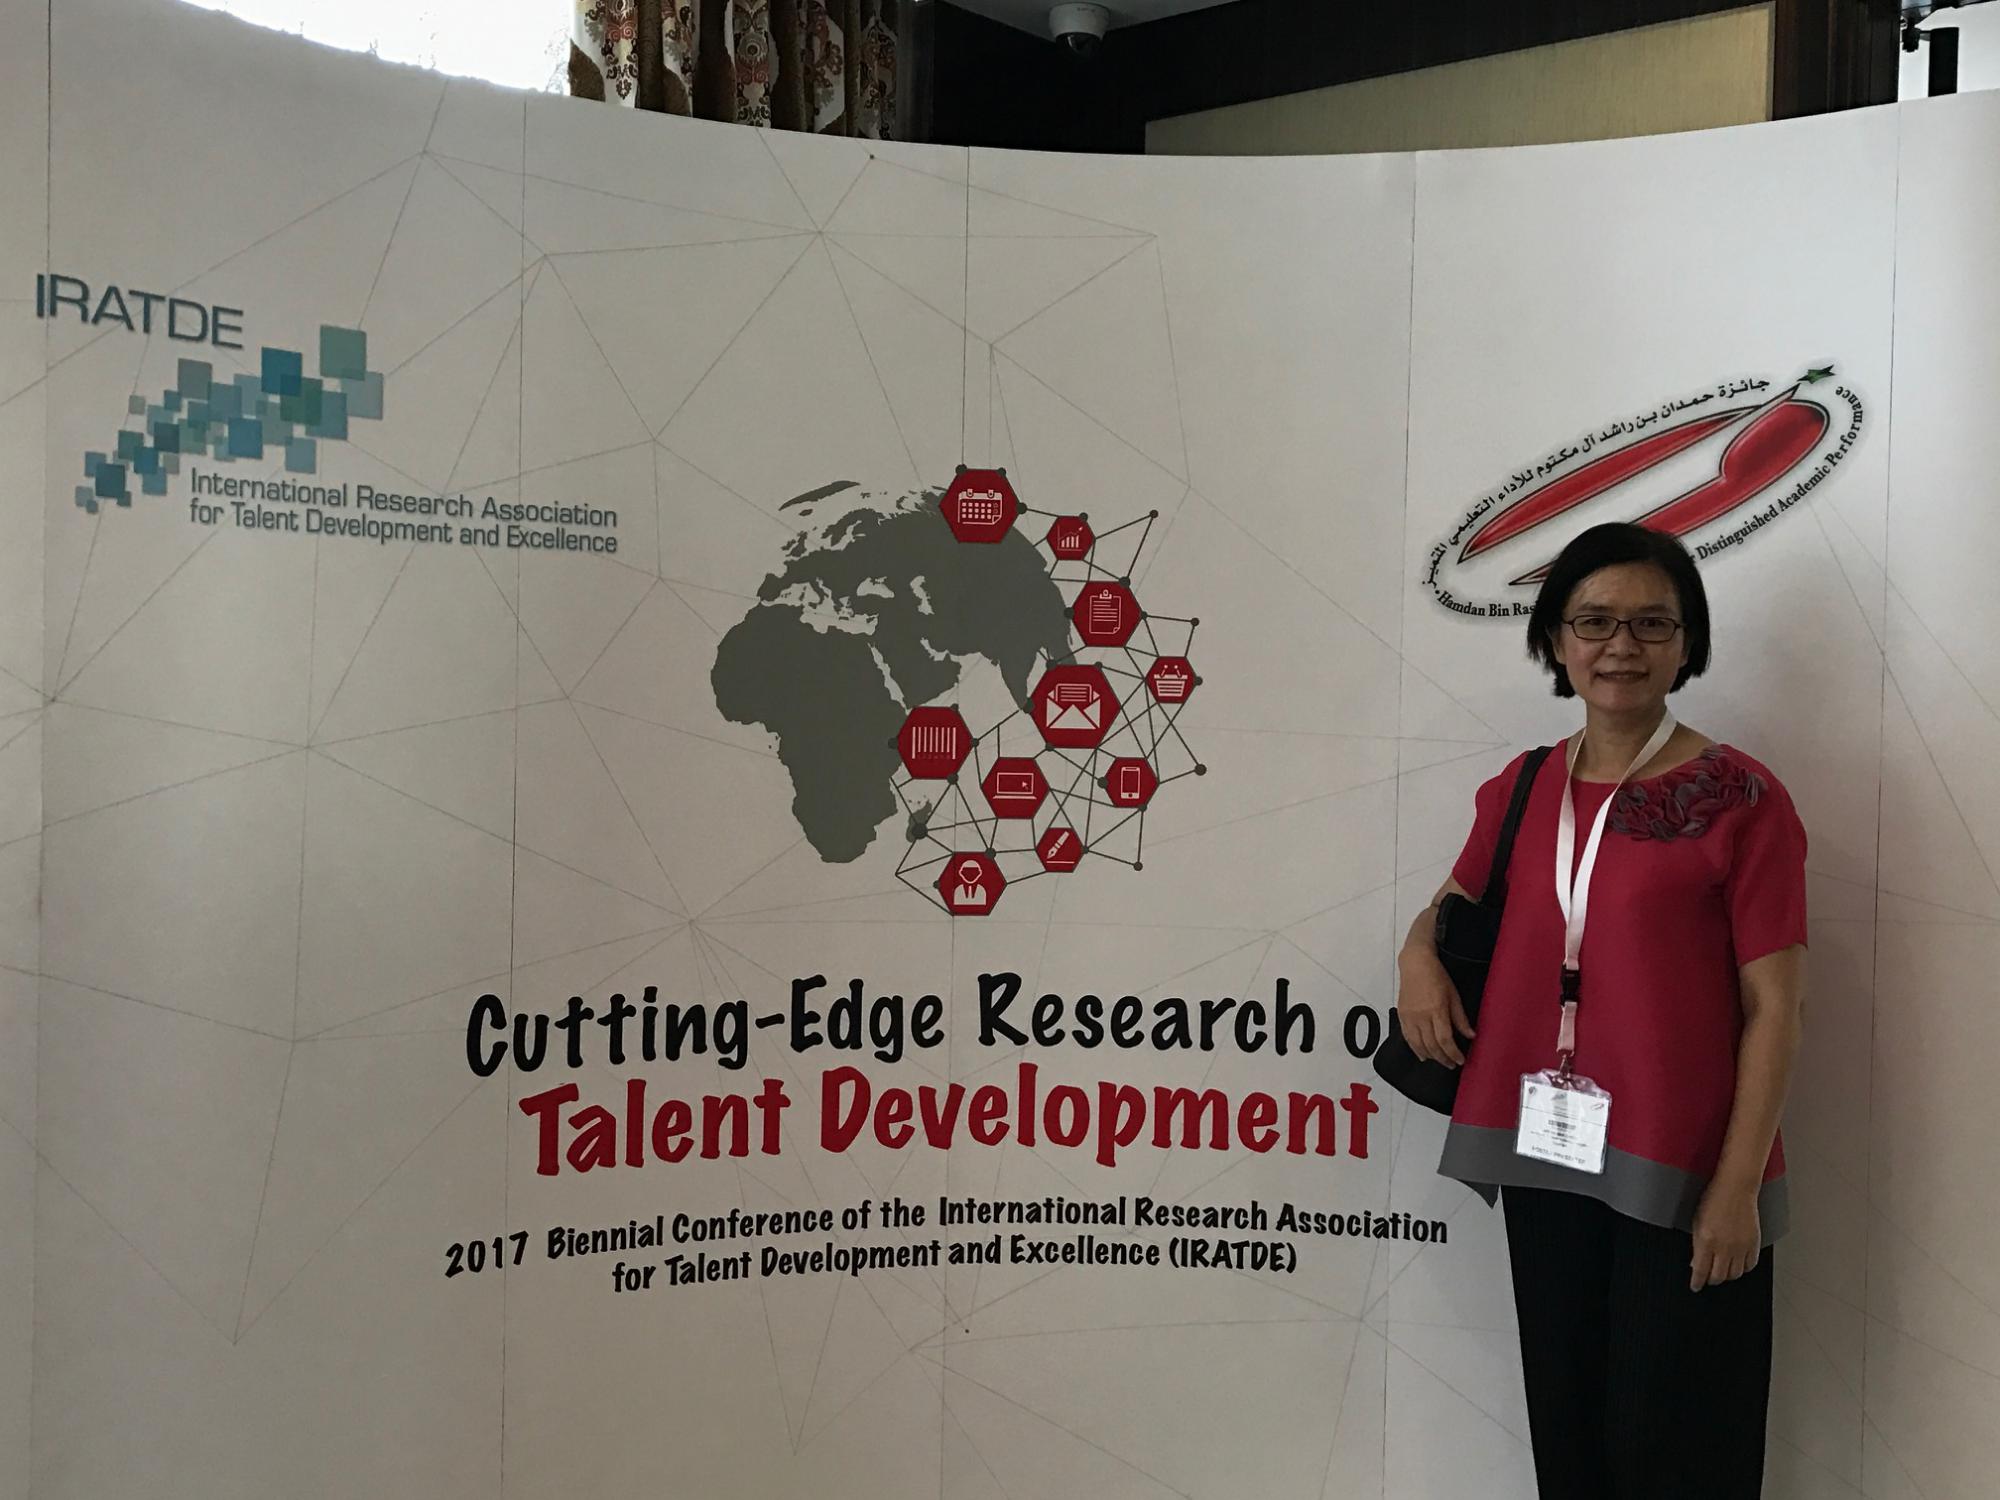 2017 Biennial Conference of the International Research Association for Talent Development and Excellence (IRATDE)環境人員合照